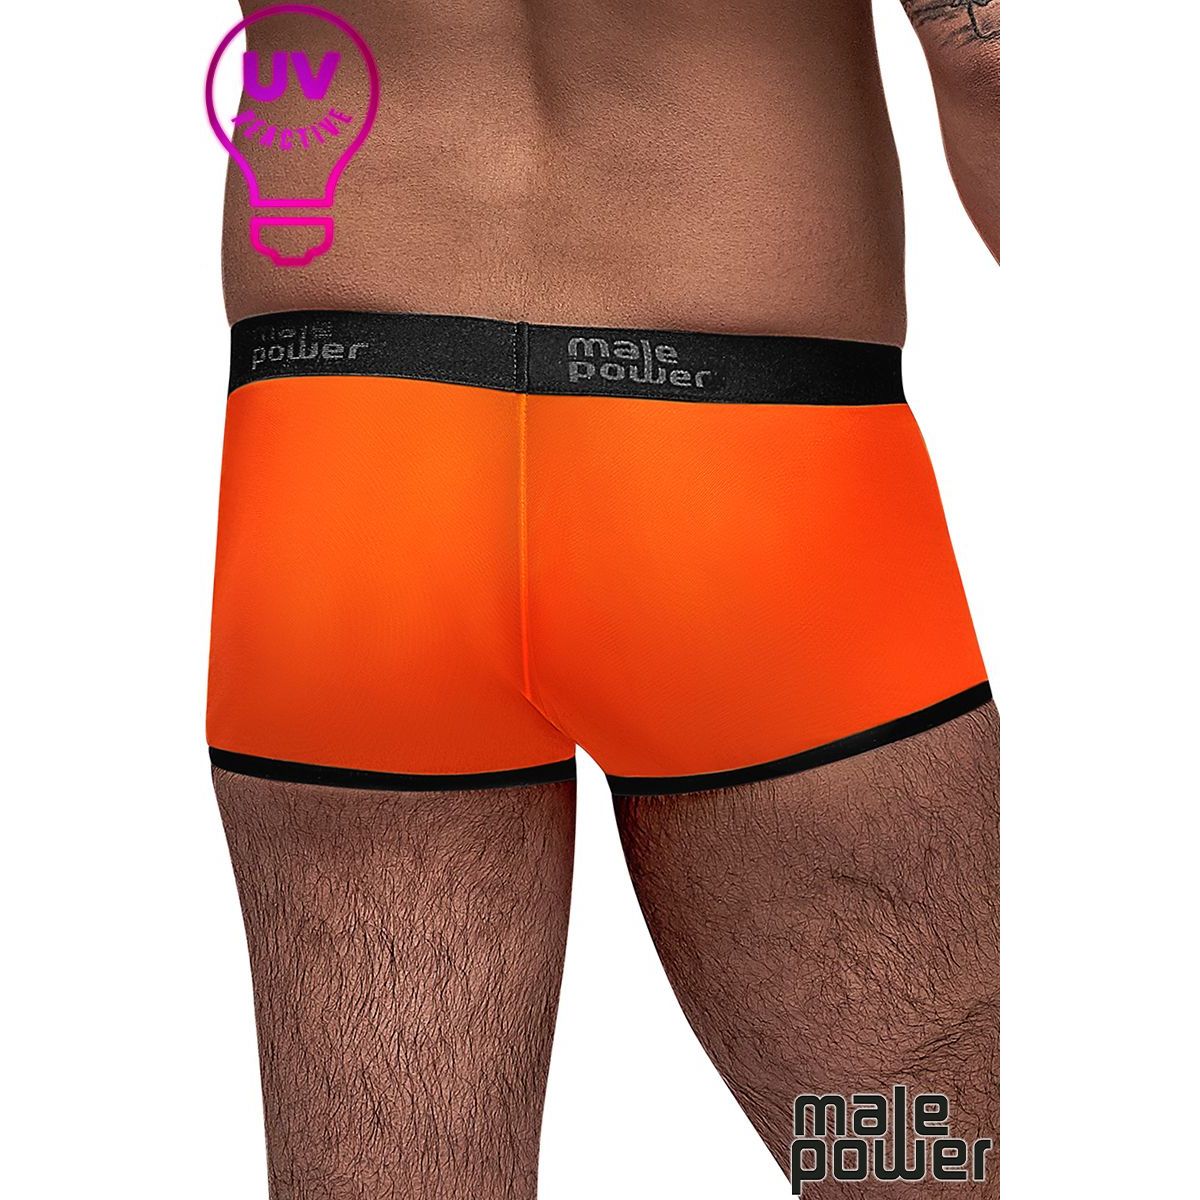 Neon Mesh Shorts for Him by Male Power